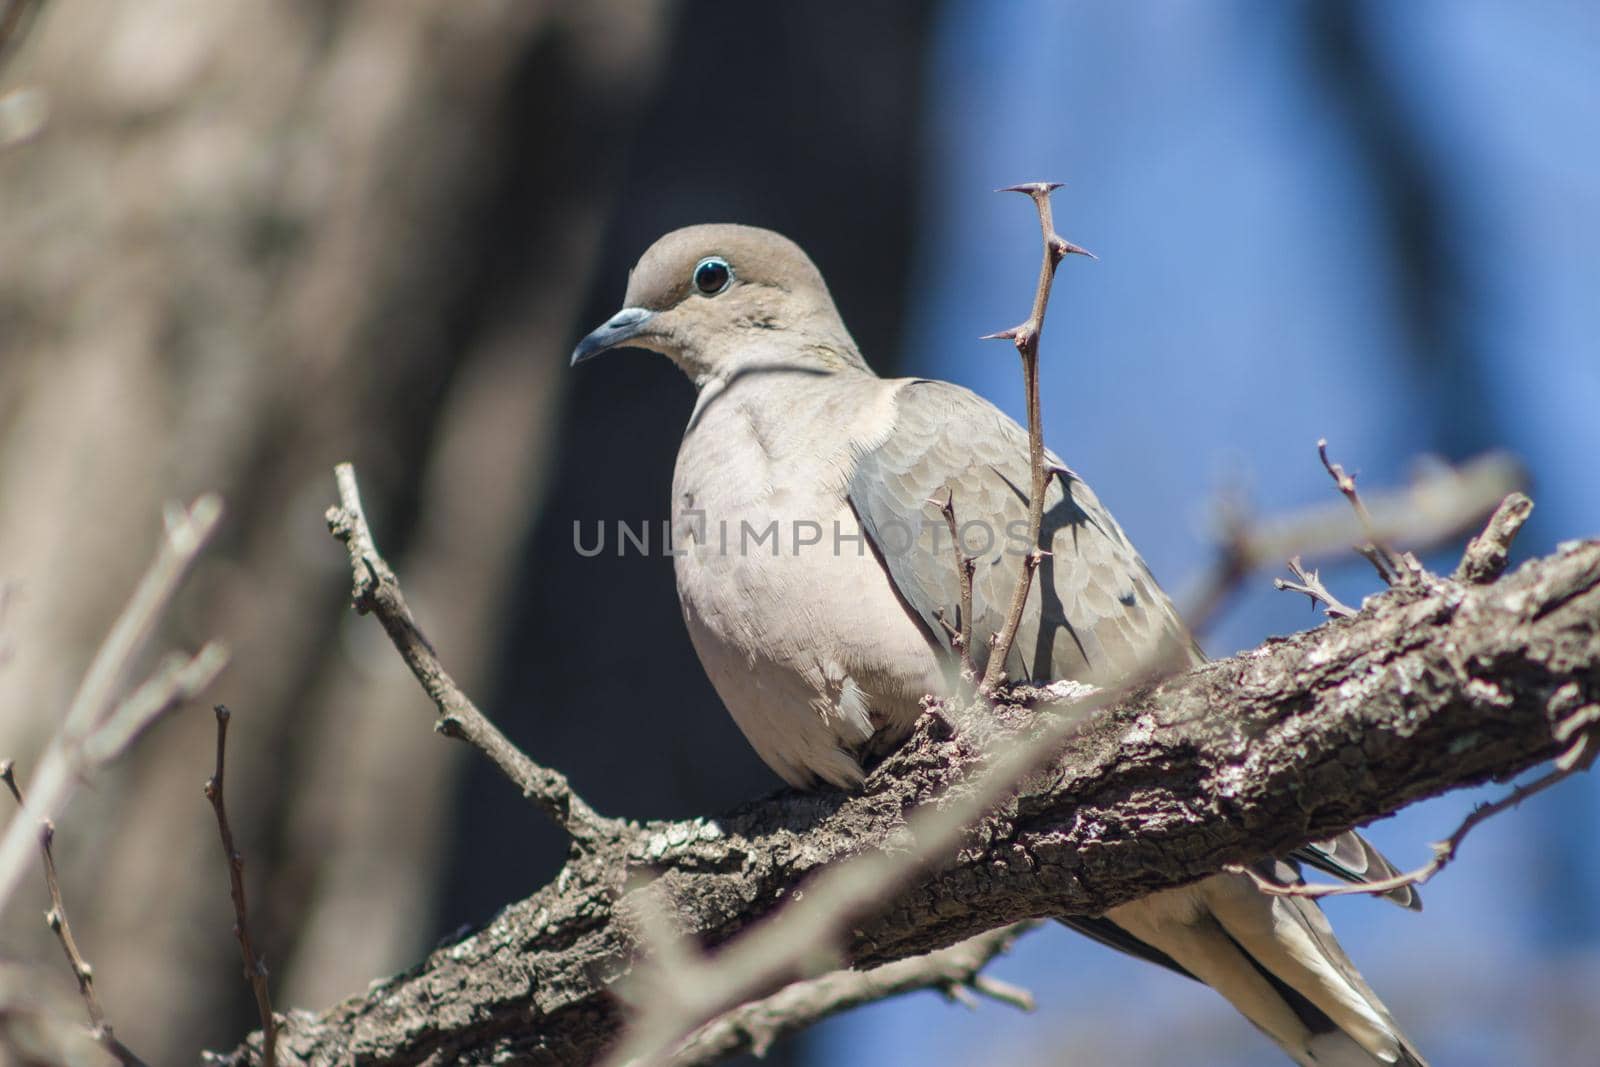 a pigeon perched on the branch in its natural habitat by GabrielaBertolini